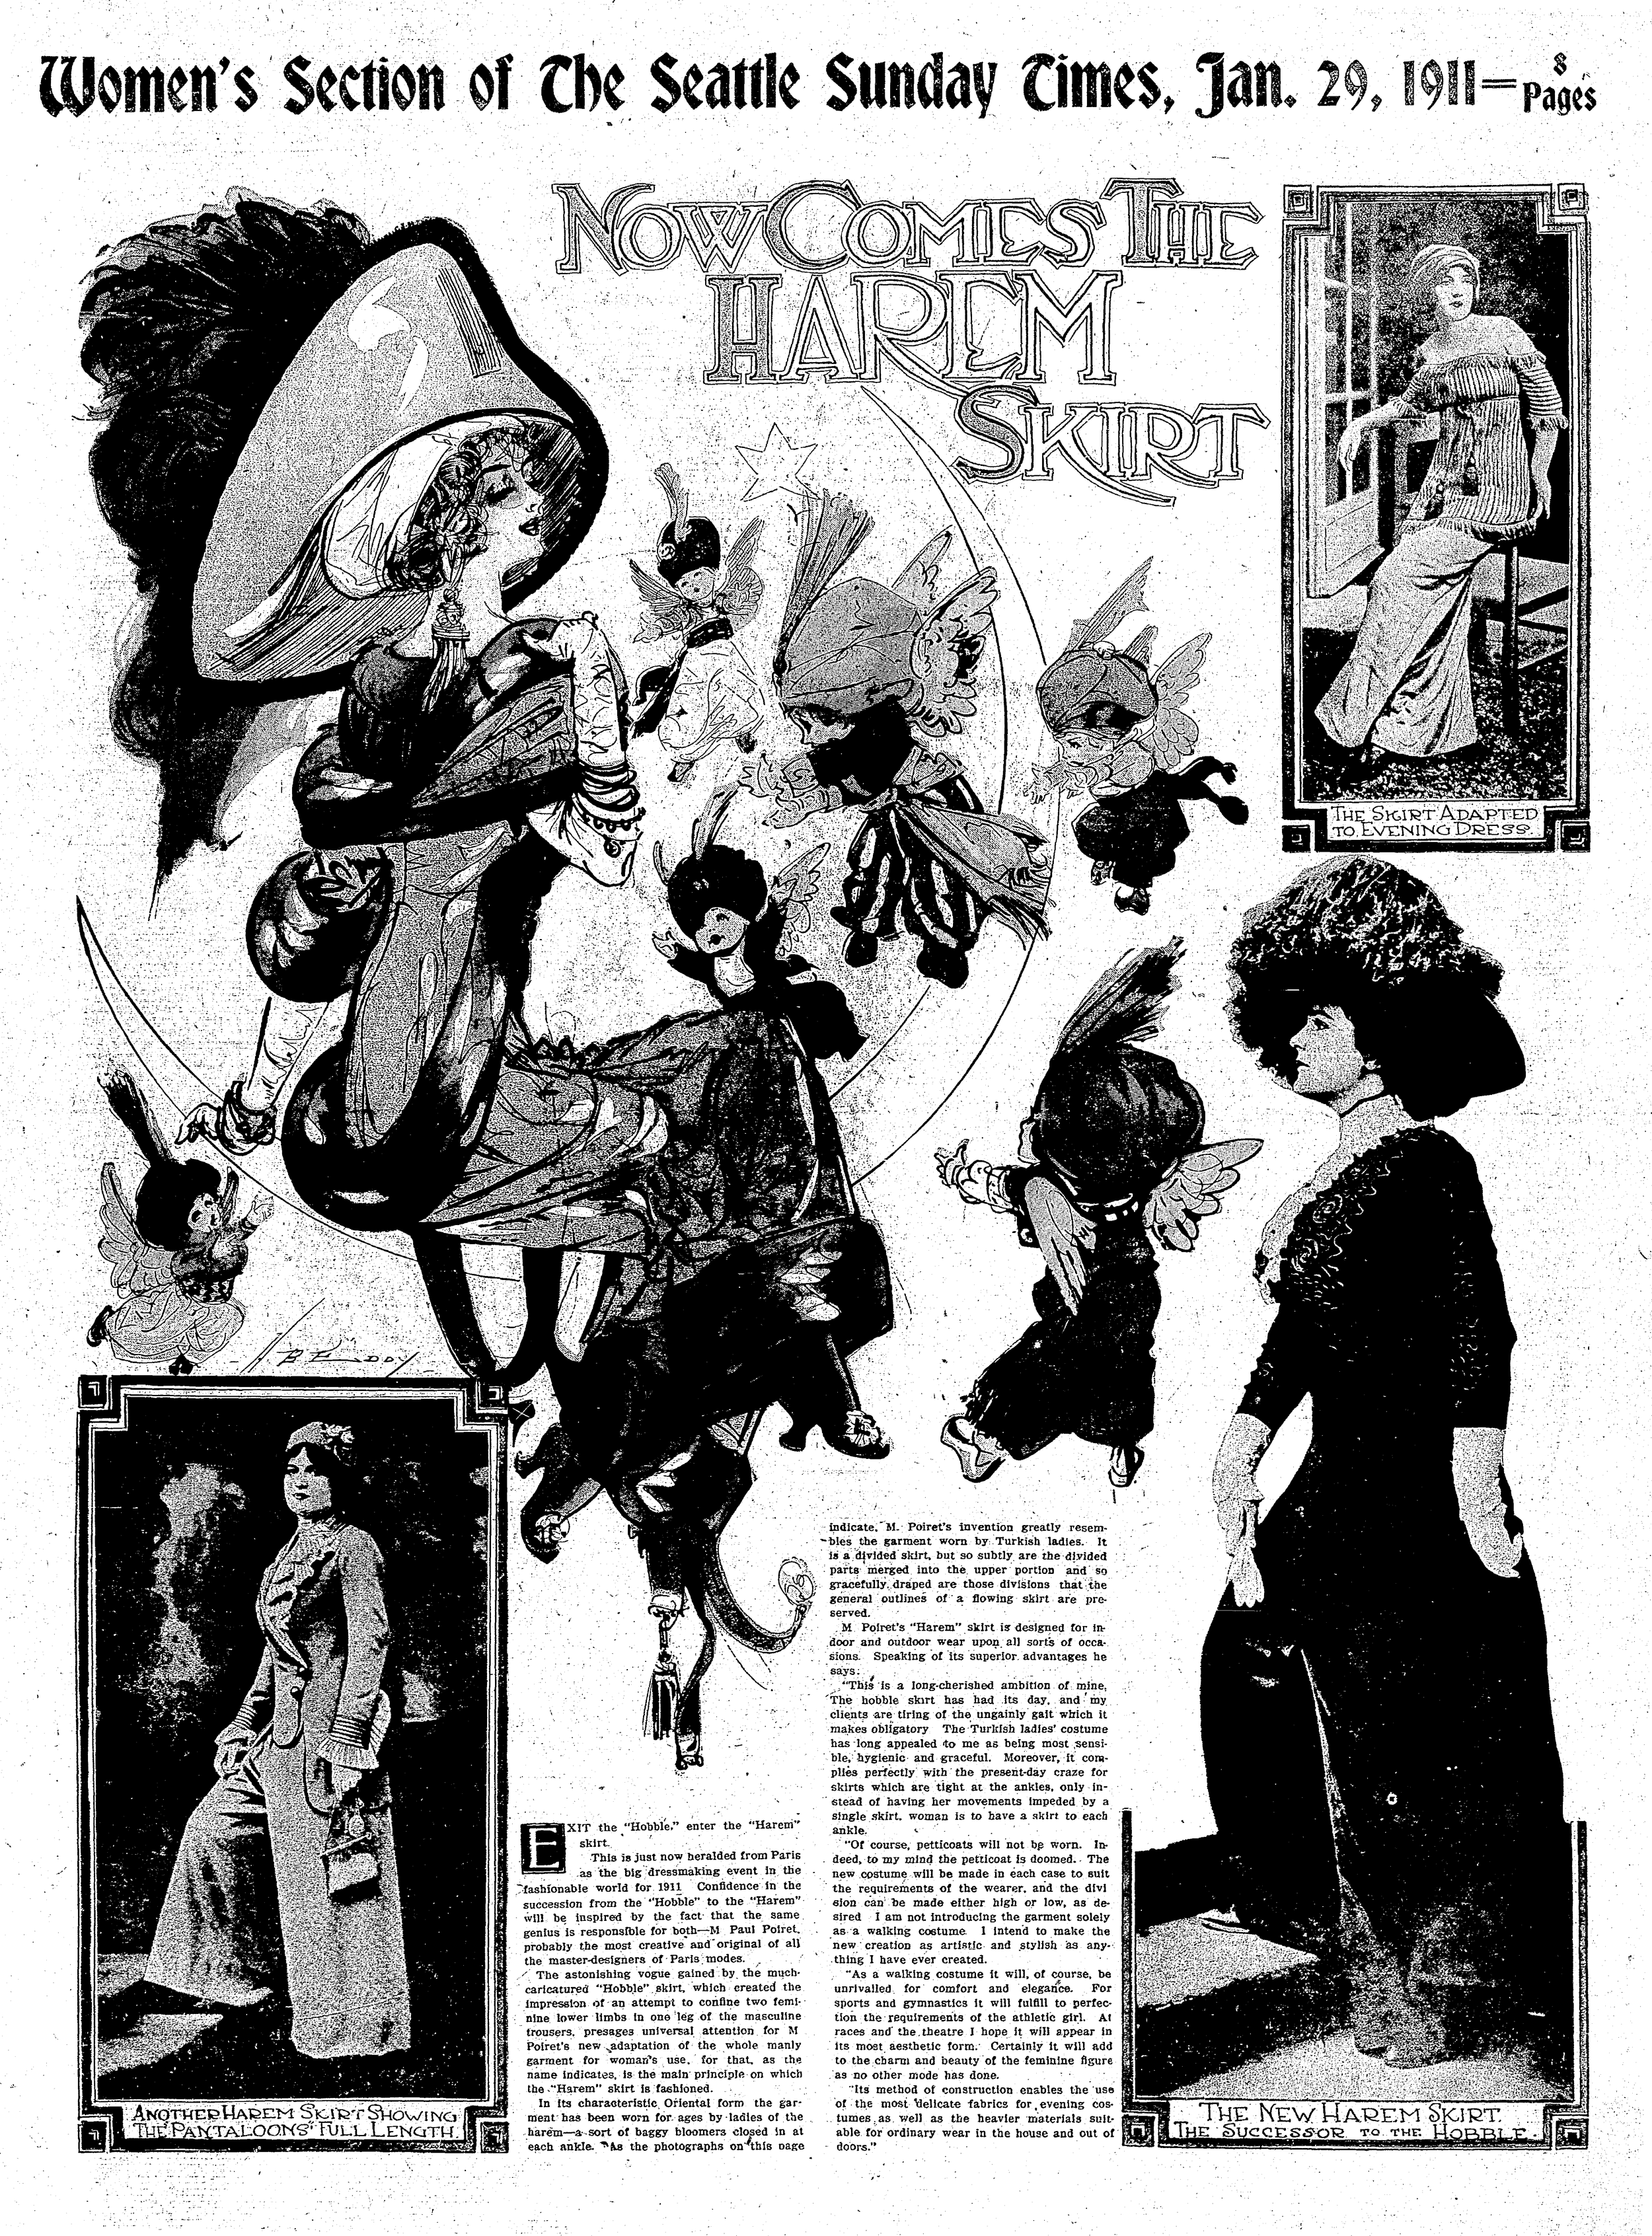  The Seattle Daily Times introduced the latest fashion in a full-page spread in the “women’s section” in January of 1911. 